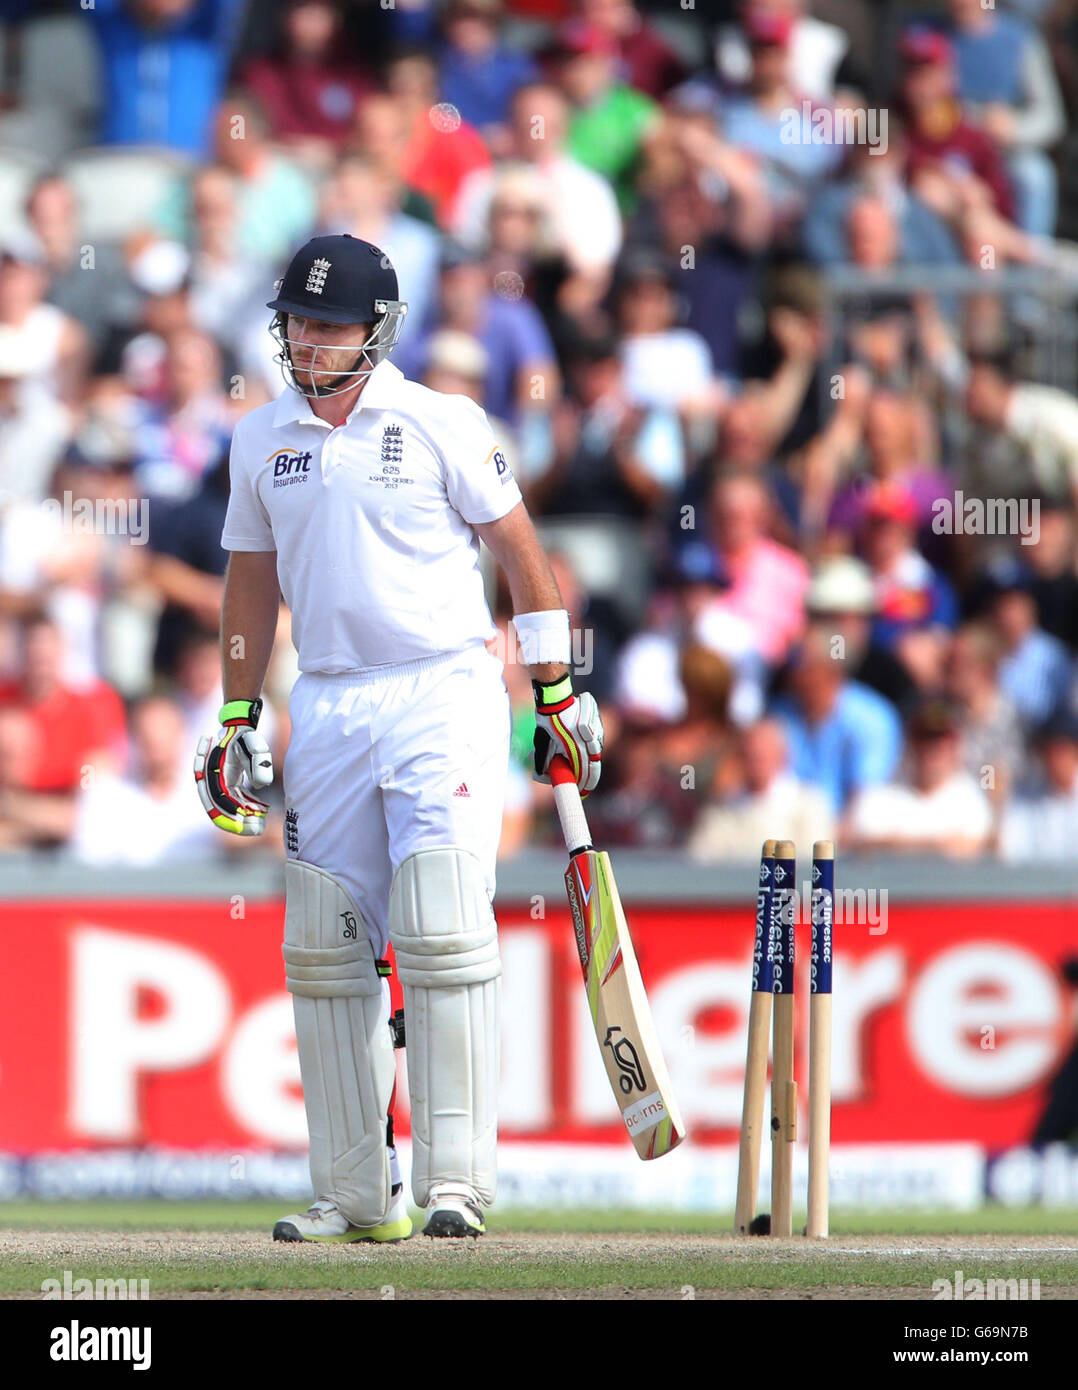 England's Ian Bell shows his dejection after he was cleaned bowled for 60 by Australia's Ryan Harris during day three of the Third Investec Ashes test match at Old Trafford Cricket Ground, Manchester. Stock Photo